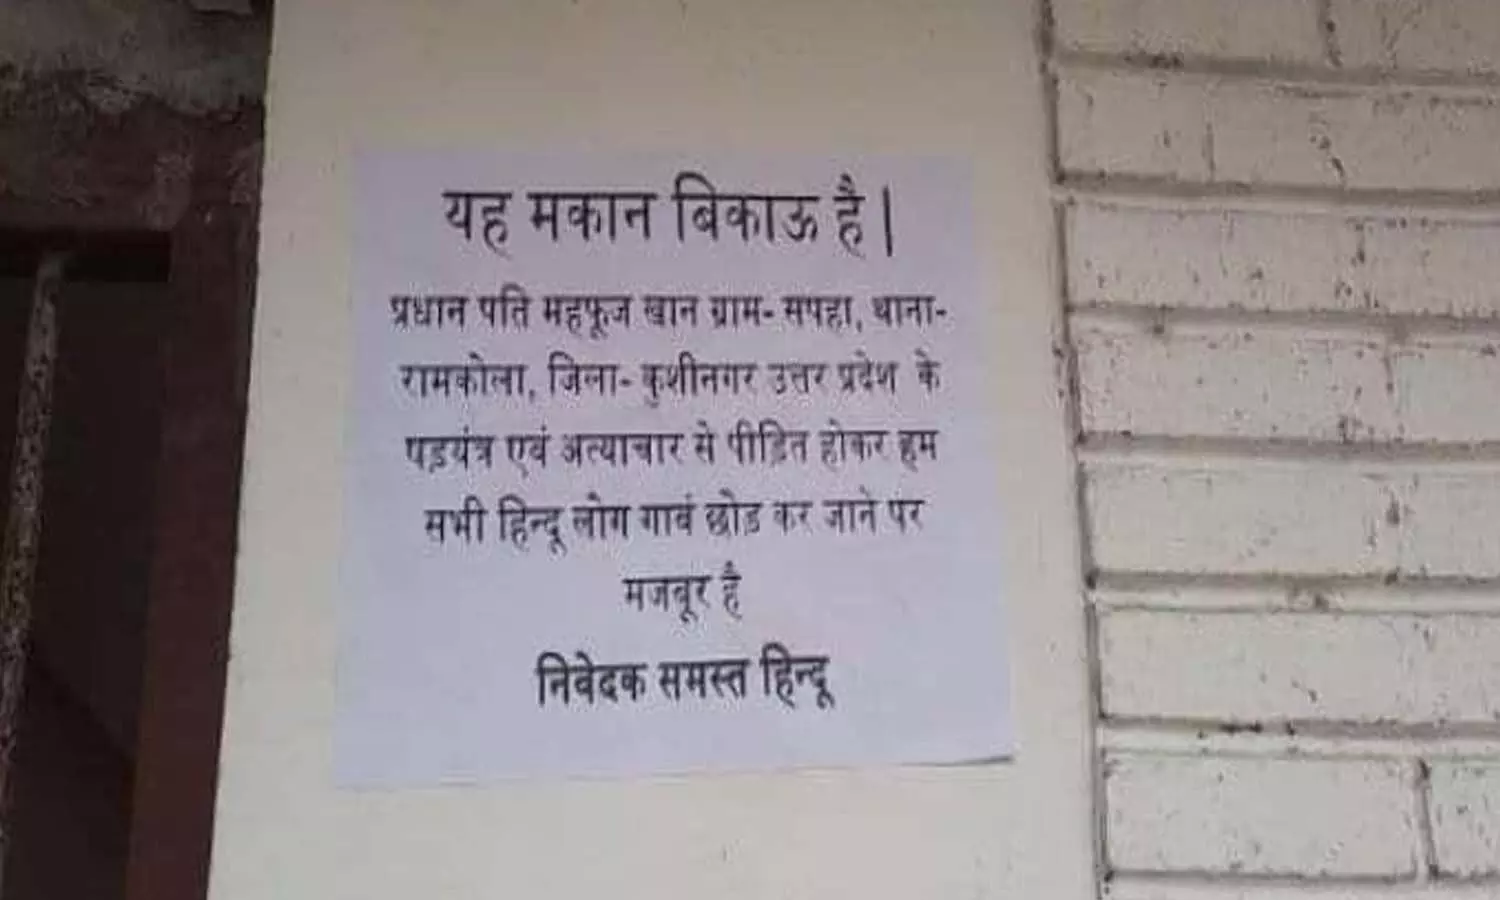 Poster for sale of houses on the houses of Dalits in Kushinagar